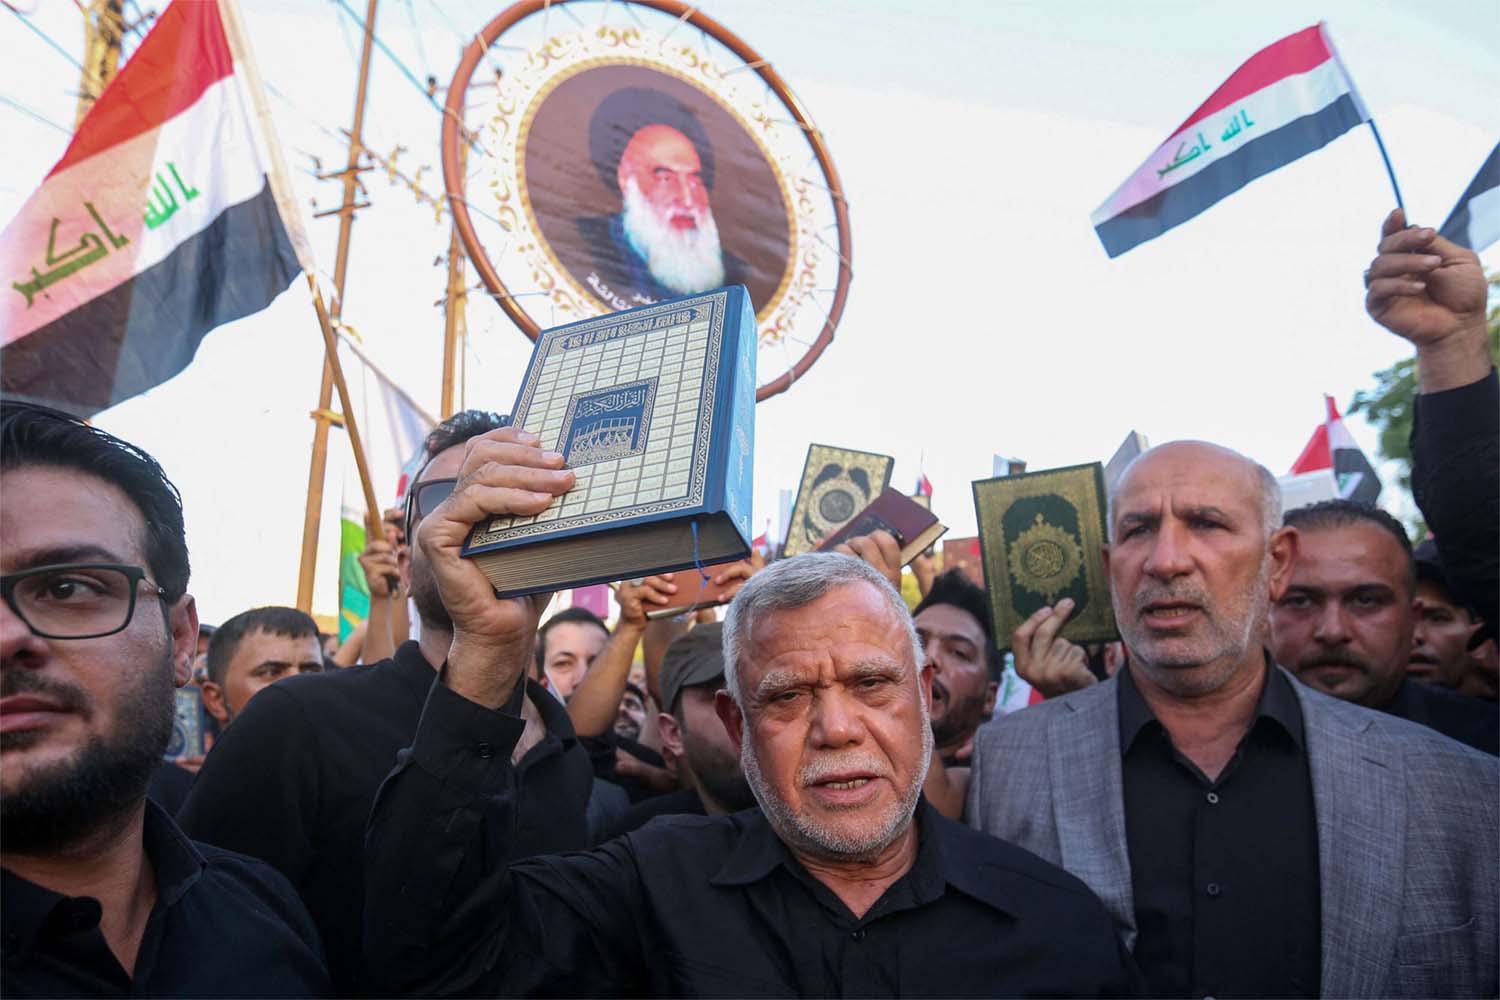 Demonstrations have raged across Iran and Iraq after Denmark and Sweden allowed the burning of the Koran